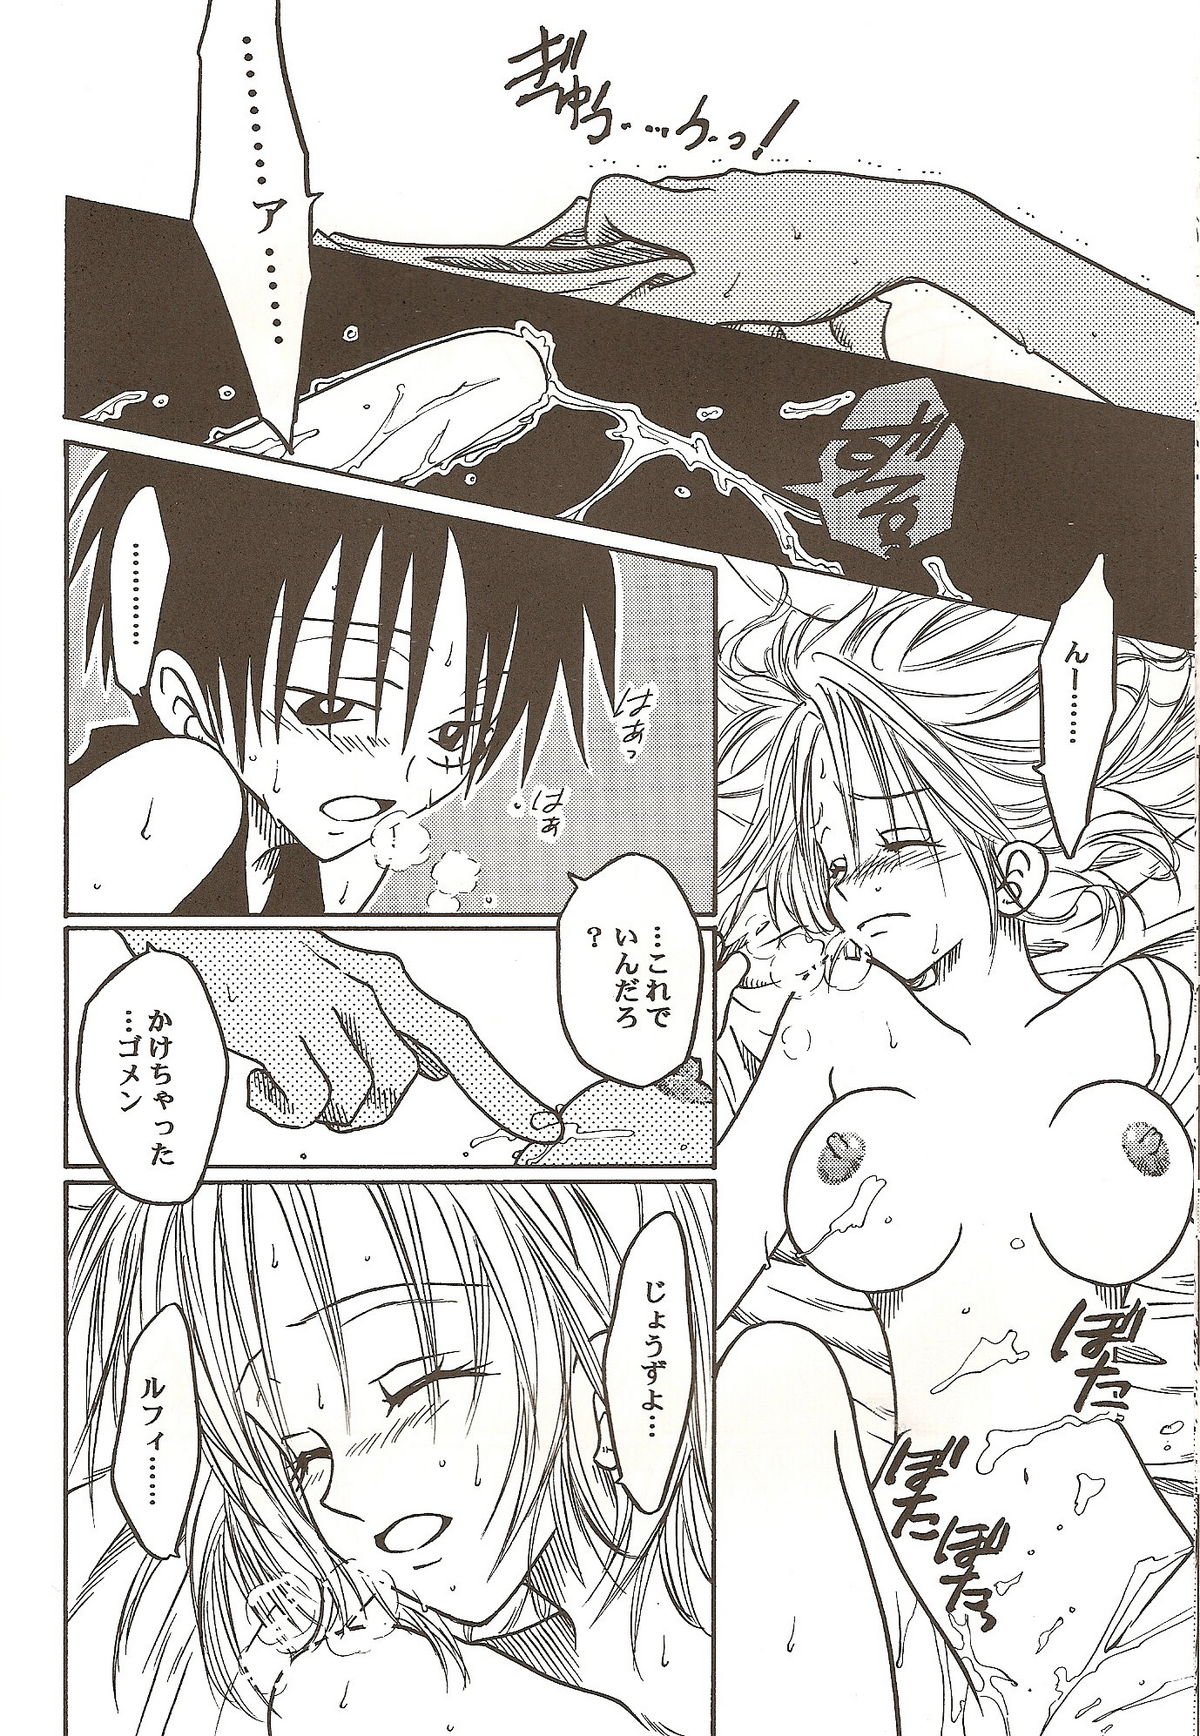 Route [One Piece] page 47 full